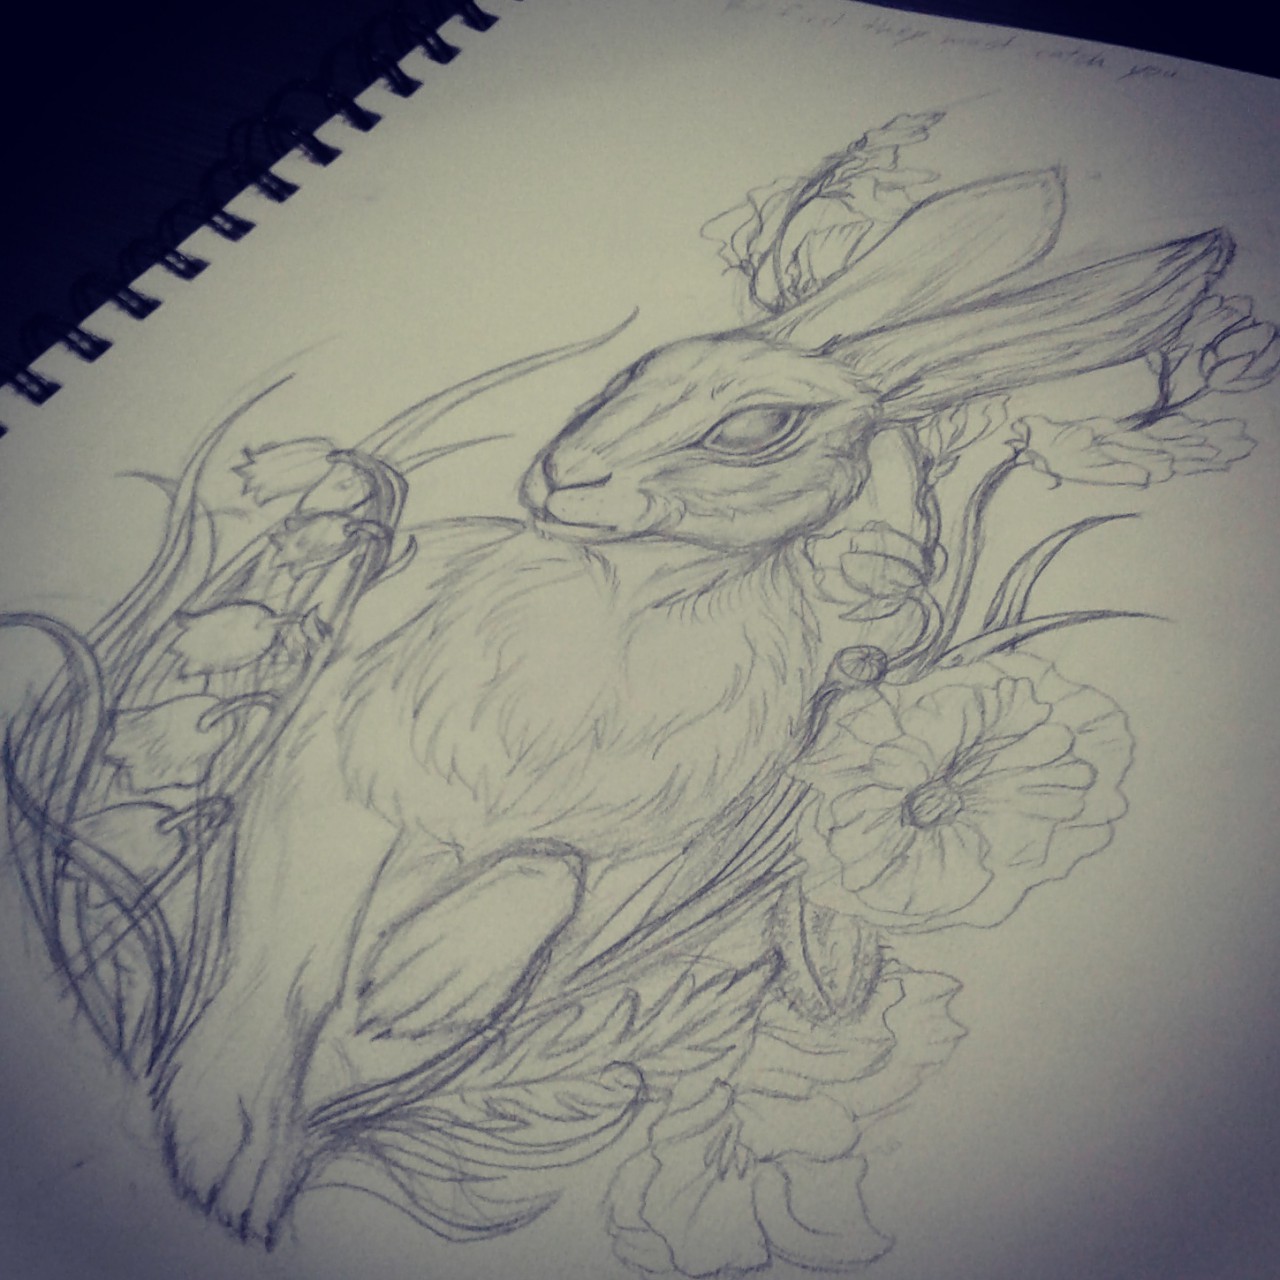 Thlayli  on Twitter I found some awesome Tattoos to Watership Down and  BunnysHares  would love to share them with you  WatershipDown Bunny  Hare Tattoo WatershipDownTattoo httpstcoxlkosssqYG  Twitter